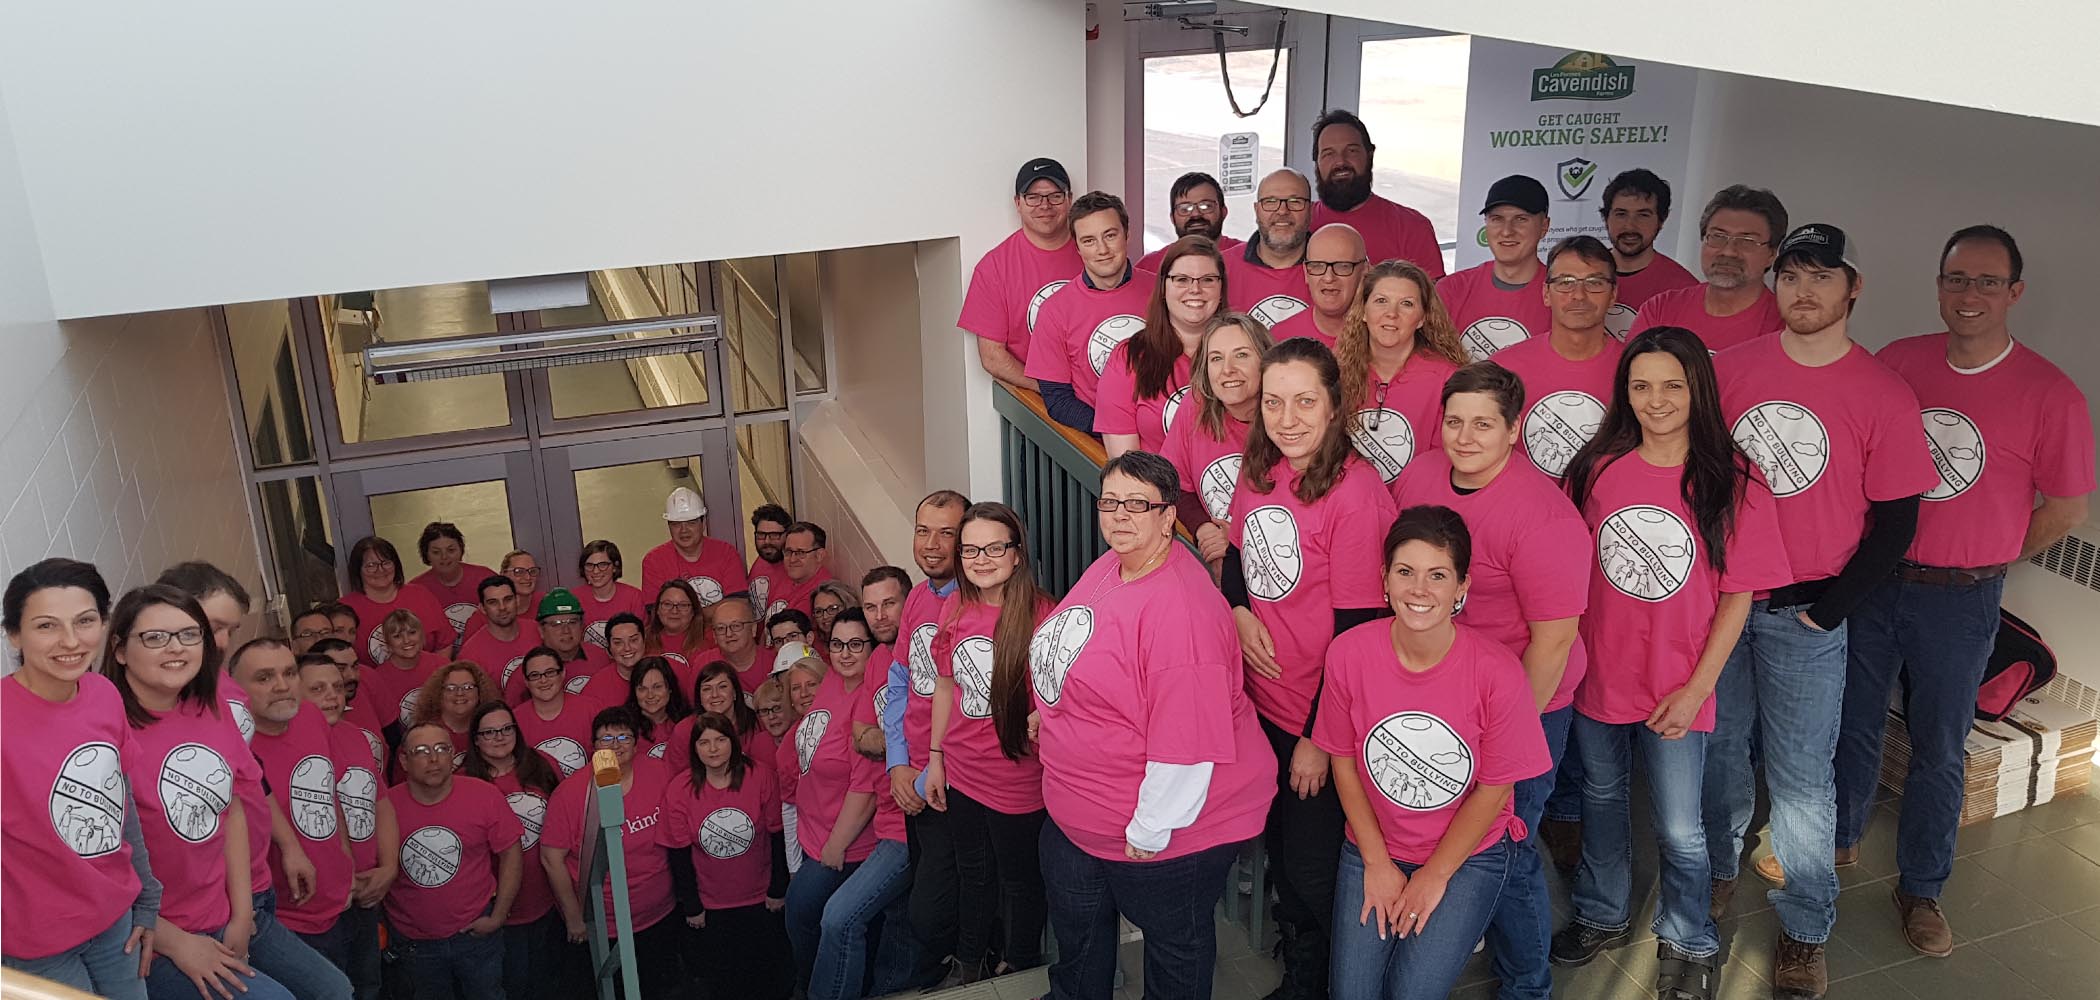 Cavendish Farms' New Annan plant employees participated in National Pink Shirt Anti-Bullying Day.